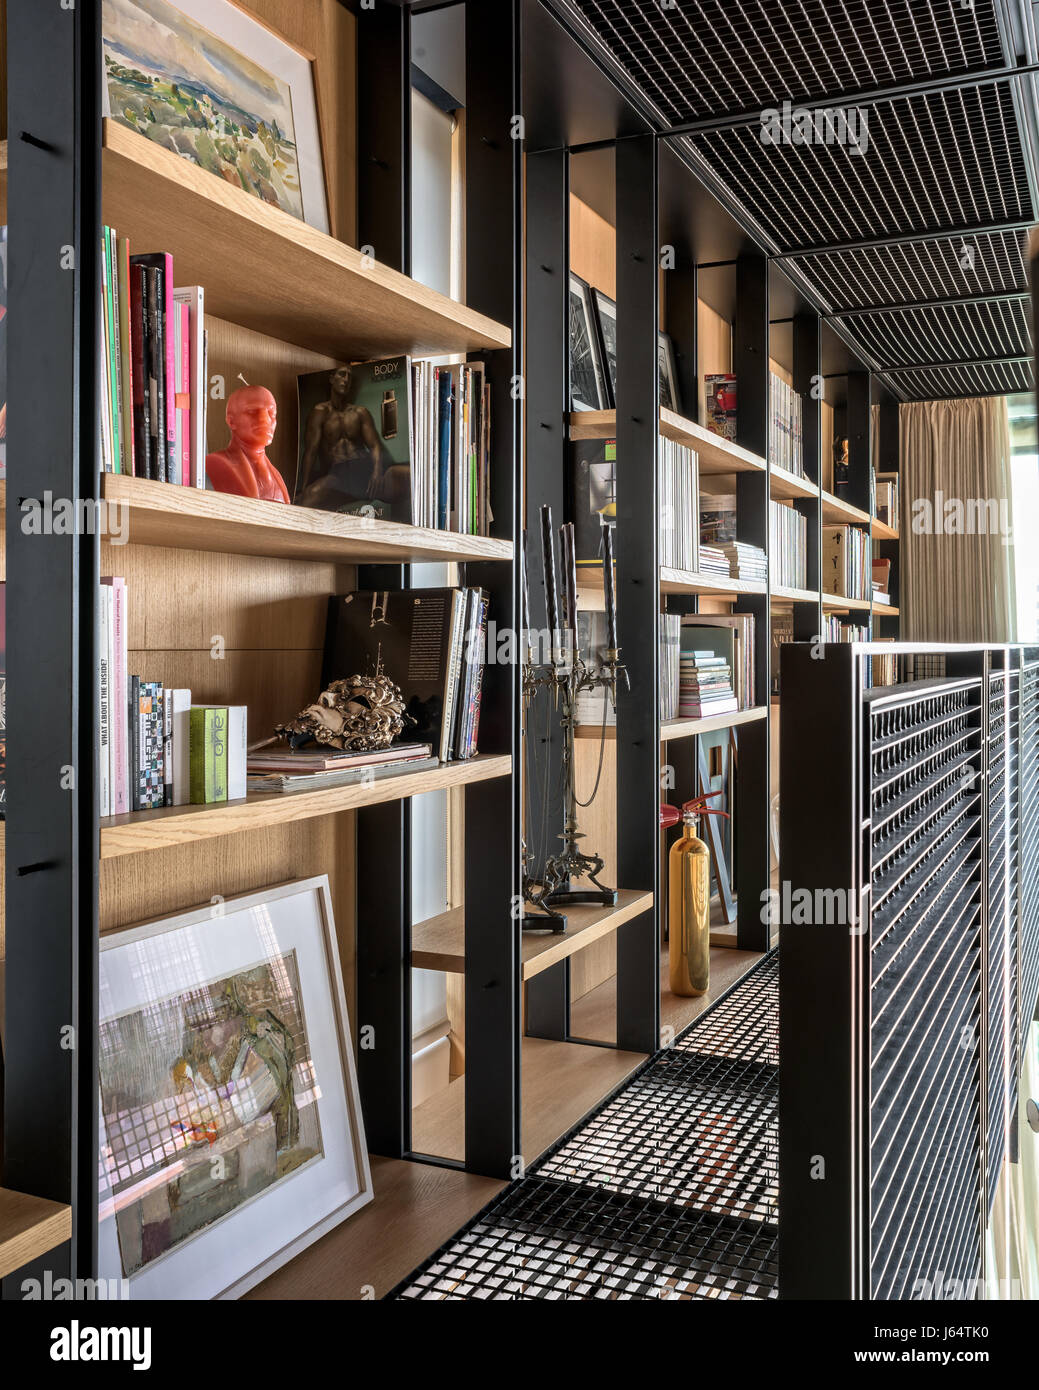 Black steel balcony lined with open shelving containing an assortment of art, books and collectibles Stock Photo